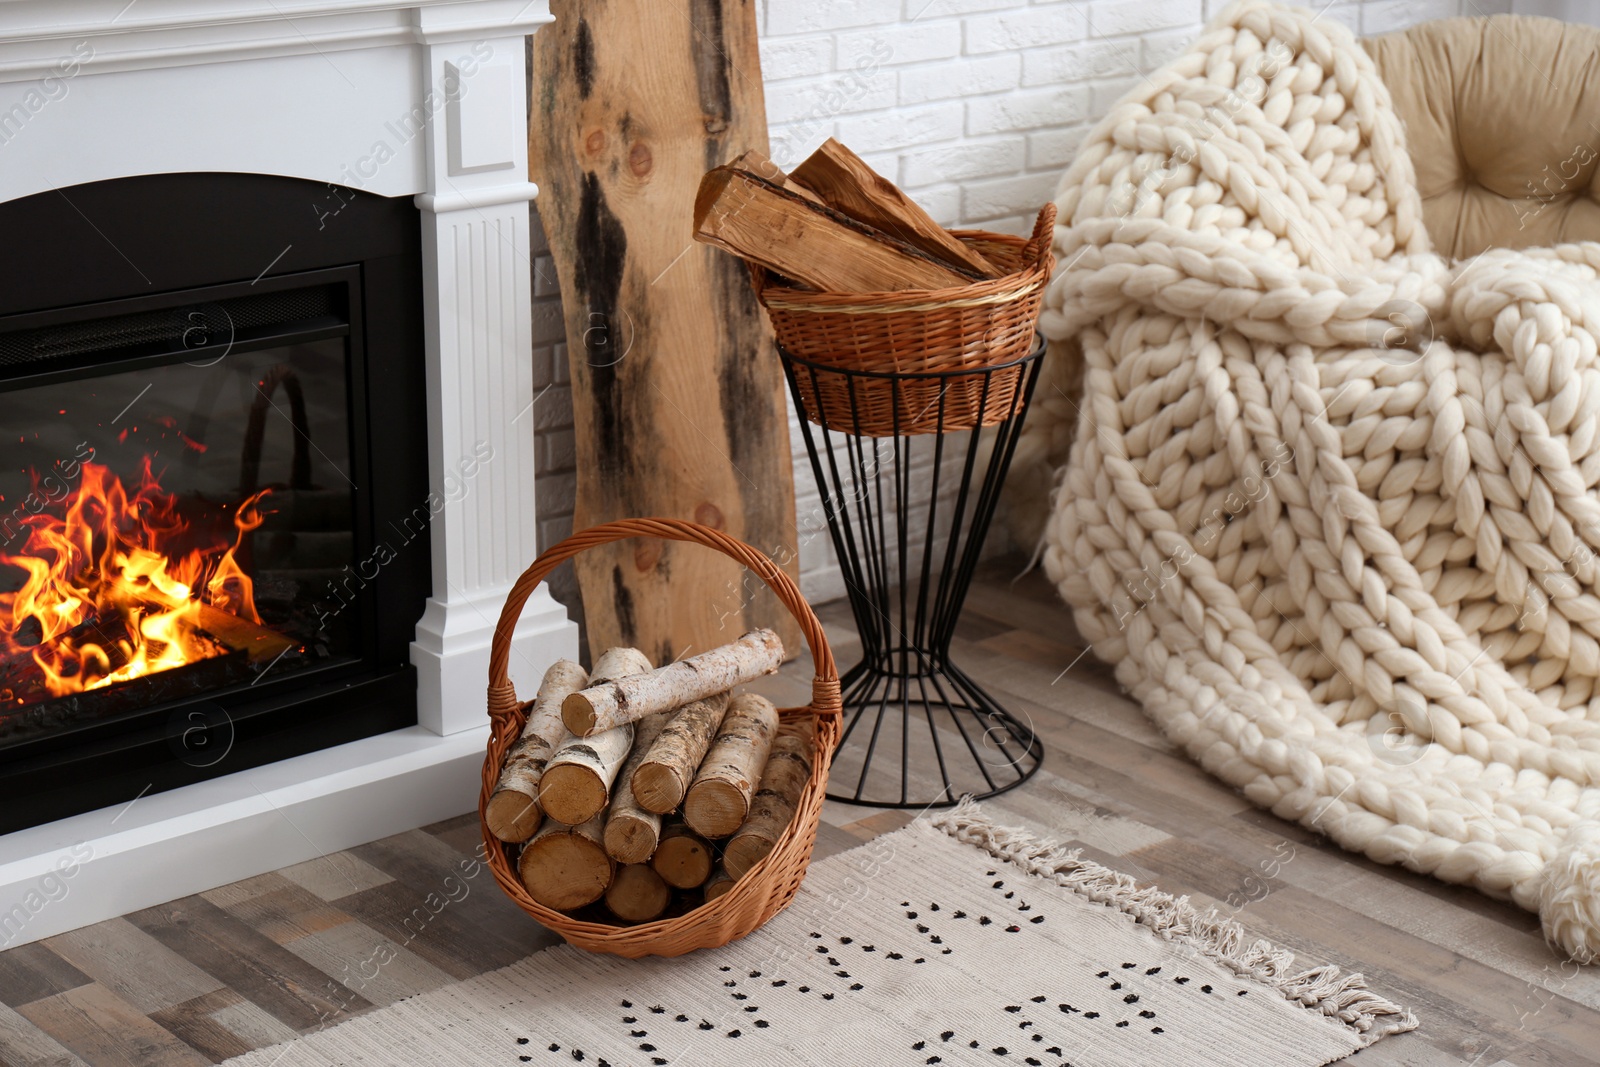 Photo of Wicker baskets with firewood and burning fireplace in cozy living room